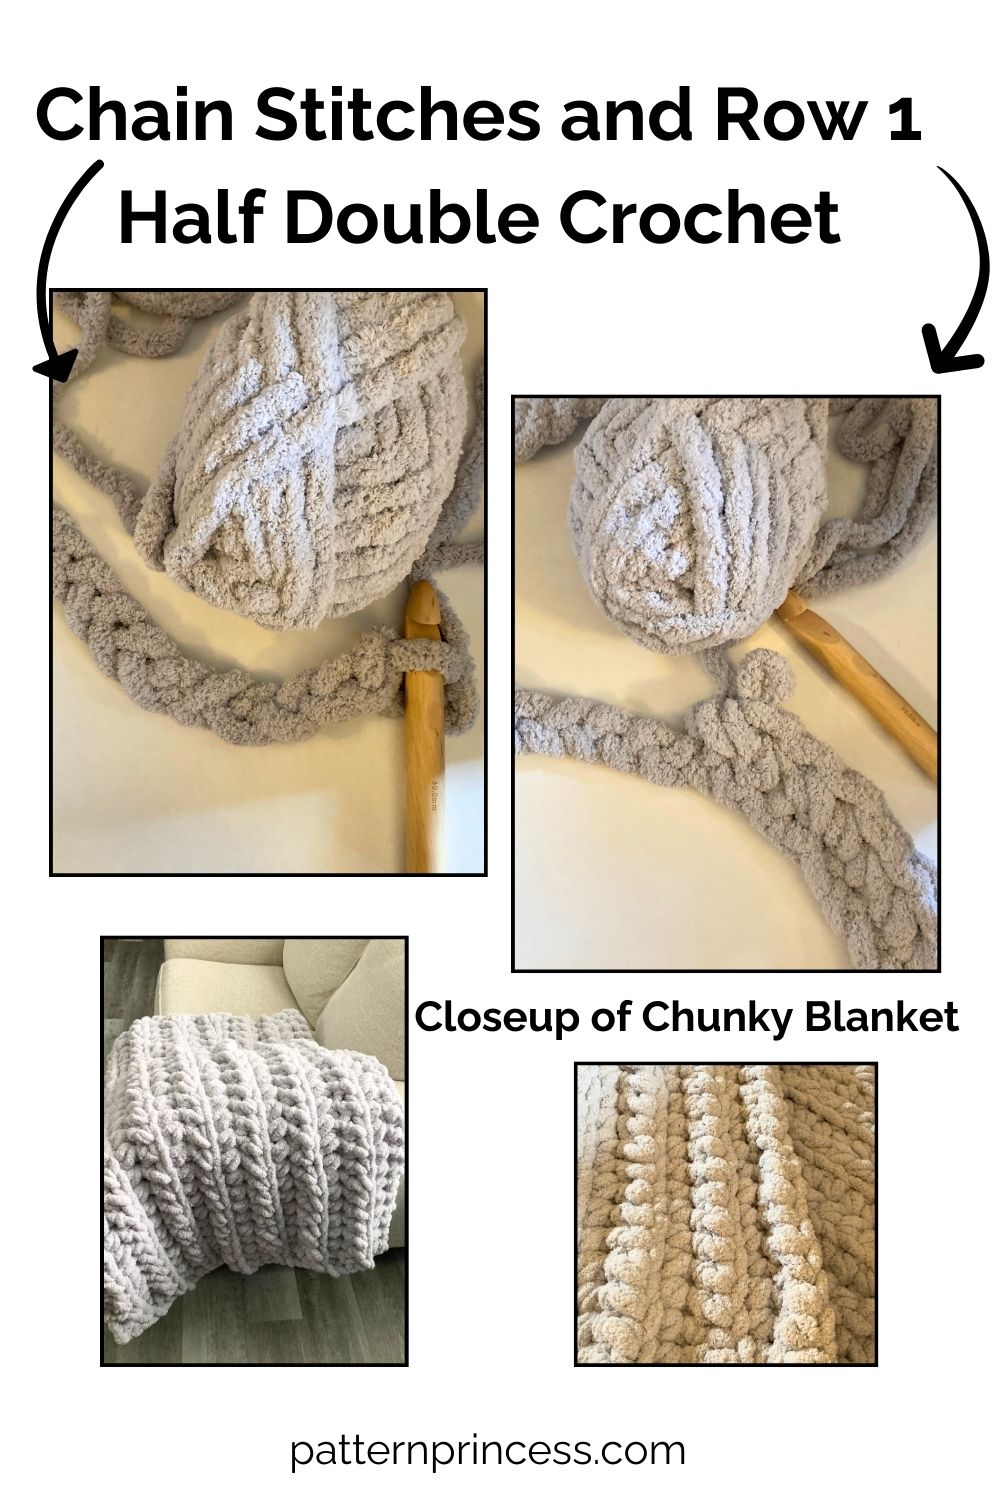 Chain Stitches and Row 1 Half Double Crochet